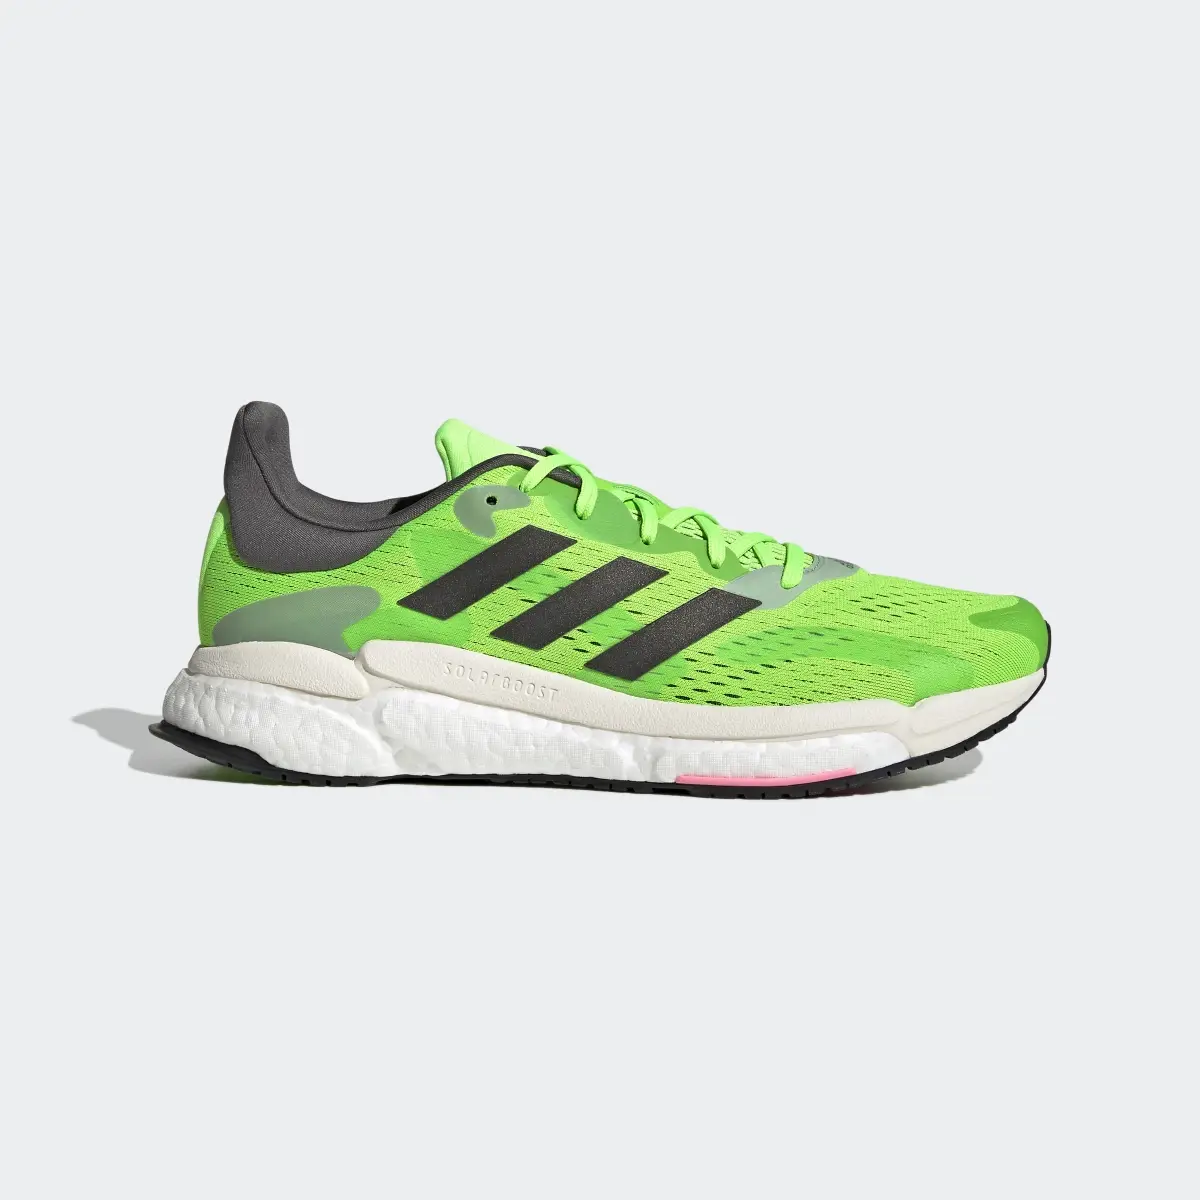 Adidas Solarboost 4 Shoes. 2